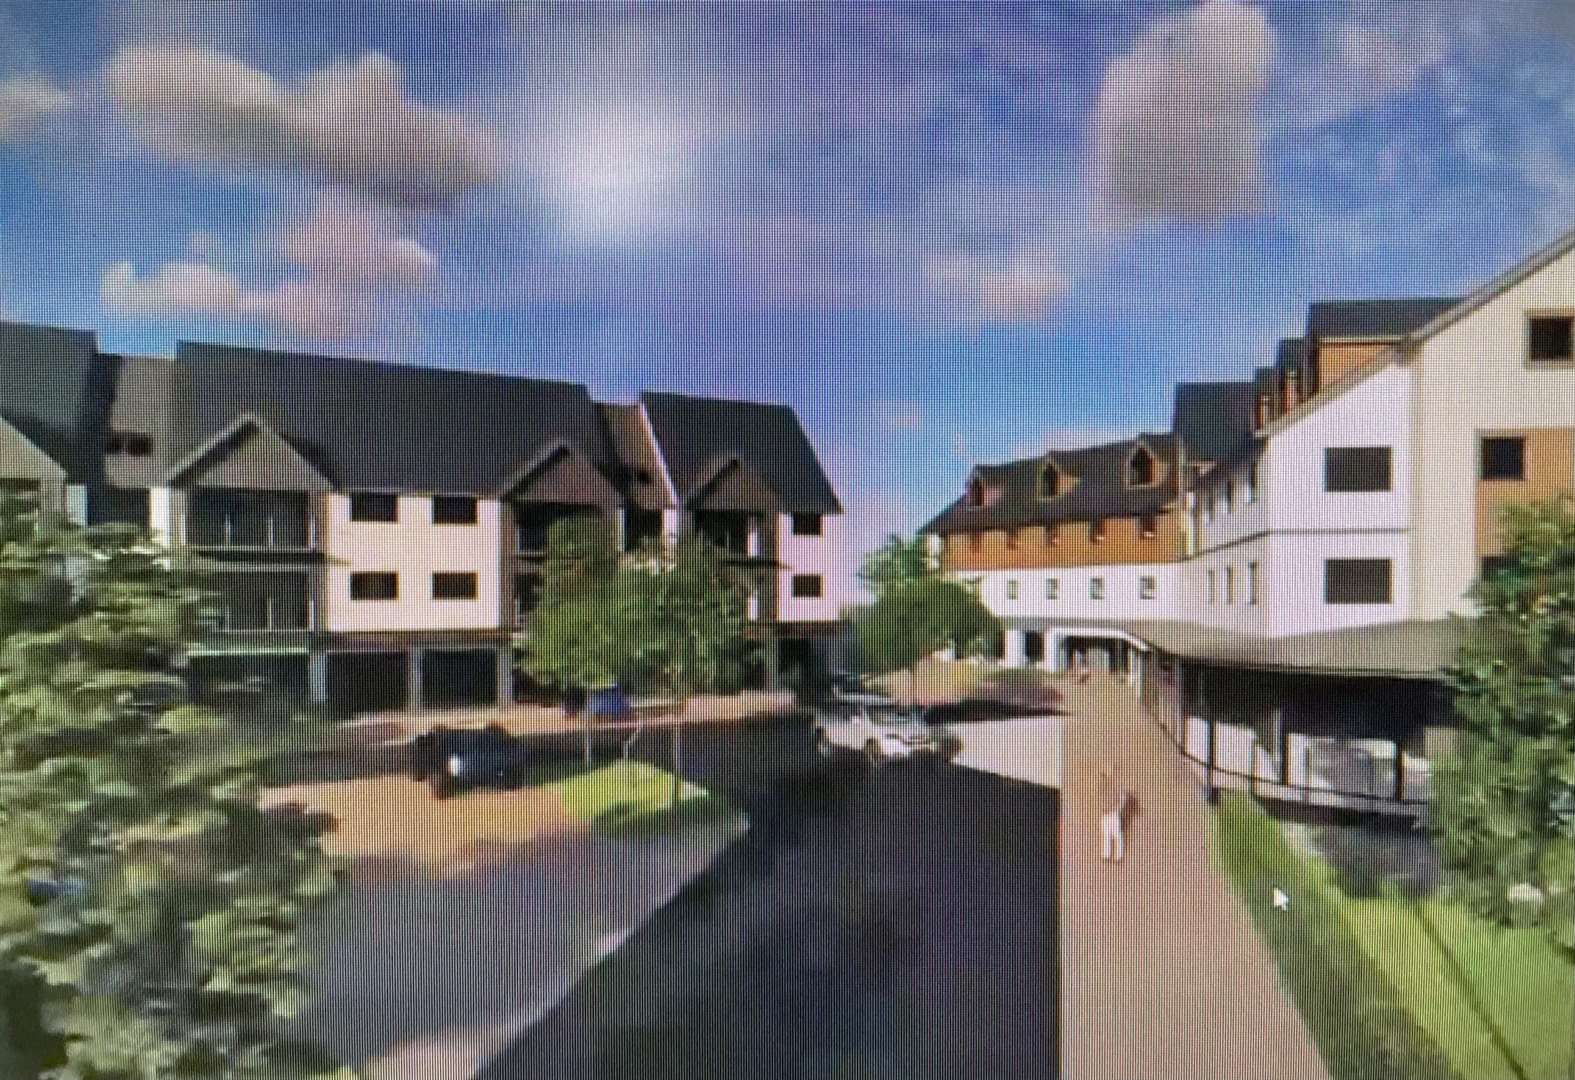 The proposed hotel (right) and the shops with holiday accommodation (left).